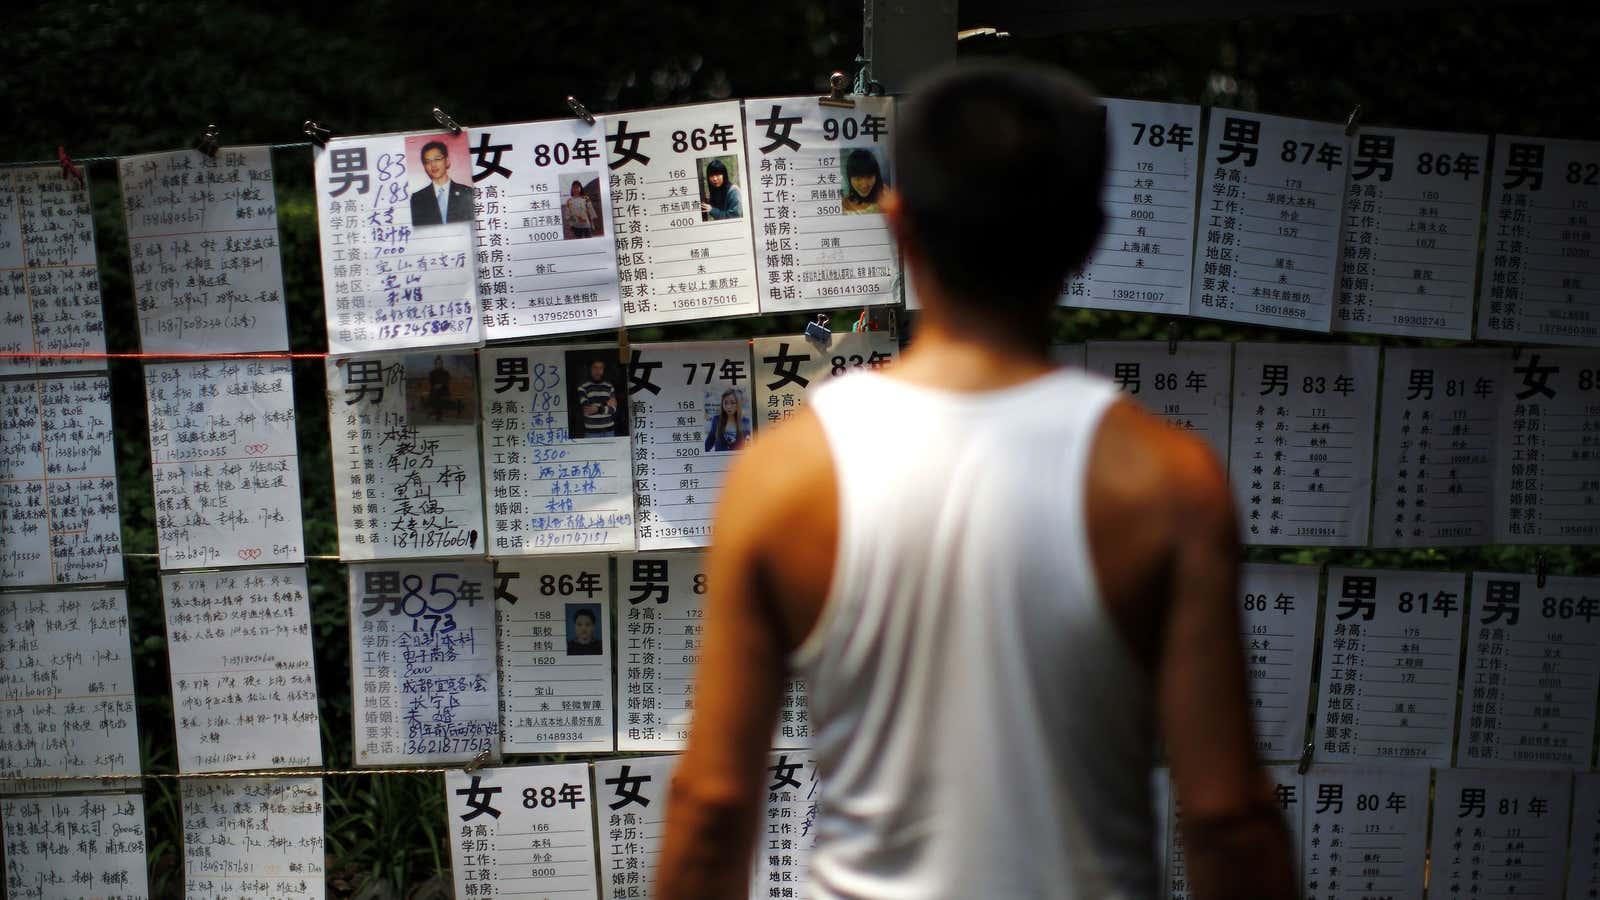 Men and women post personal ads in Shanghai’s People’s Square. The number in bold indicates what  year they were born.